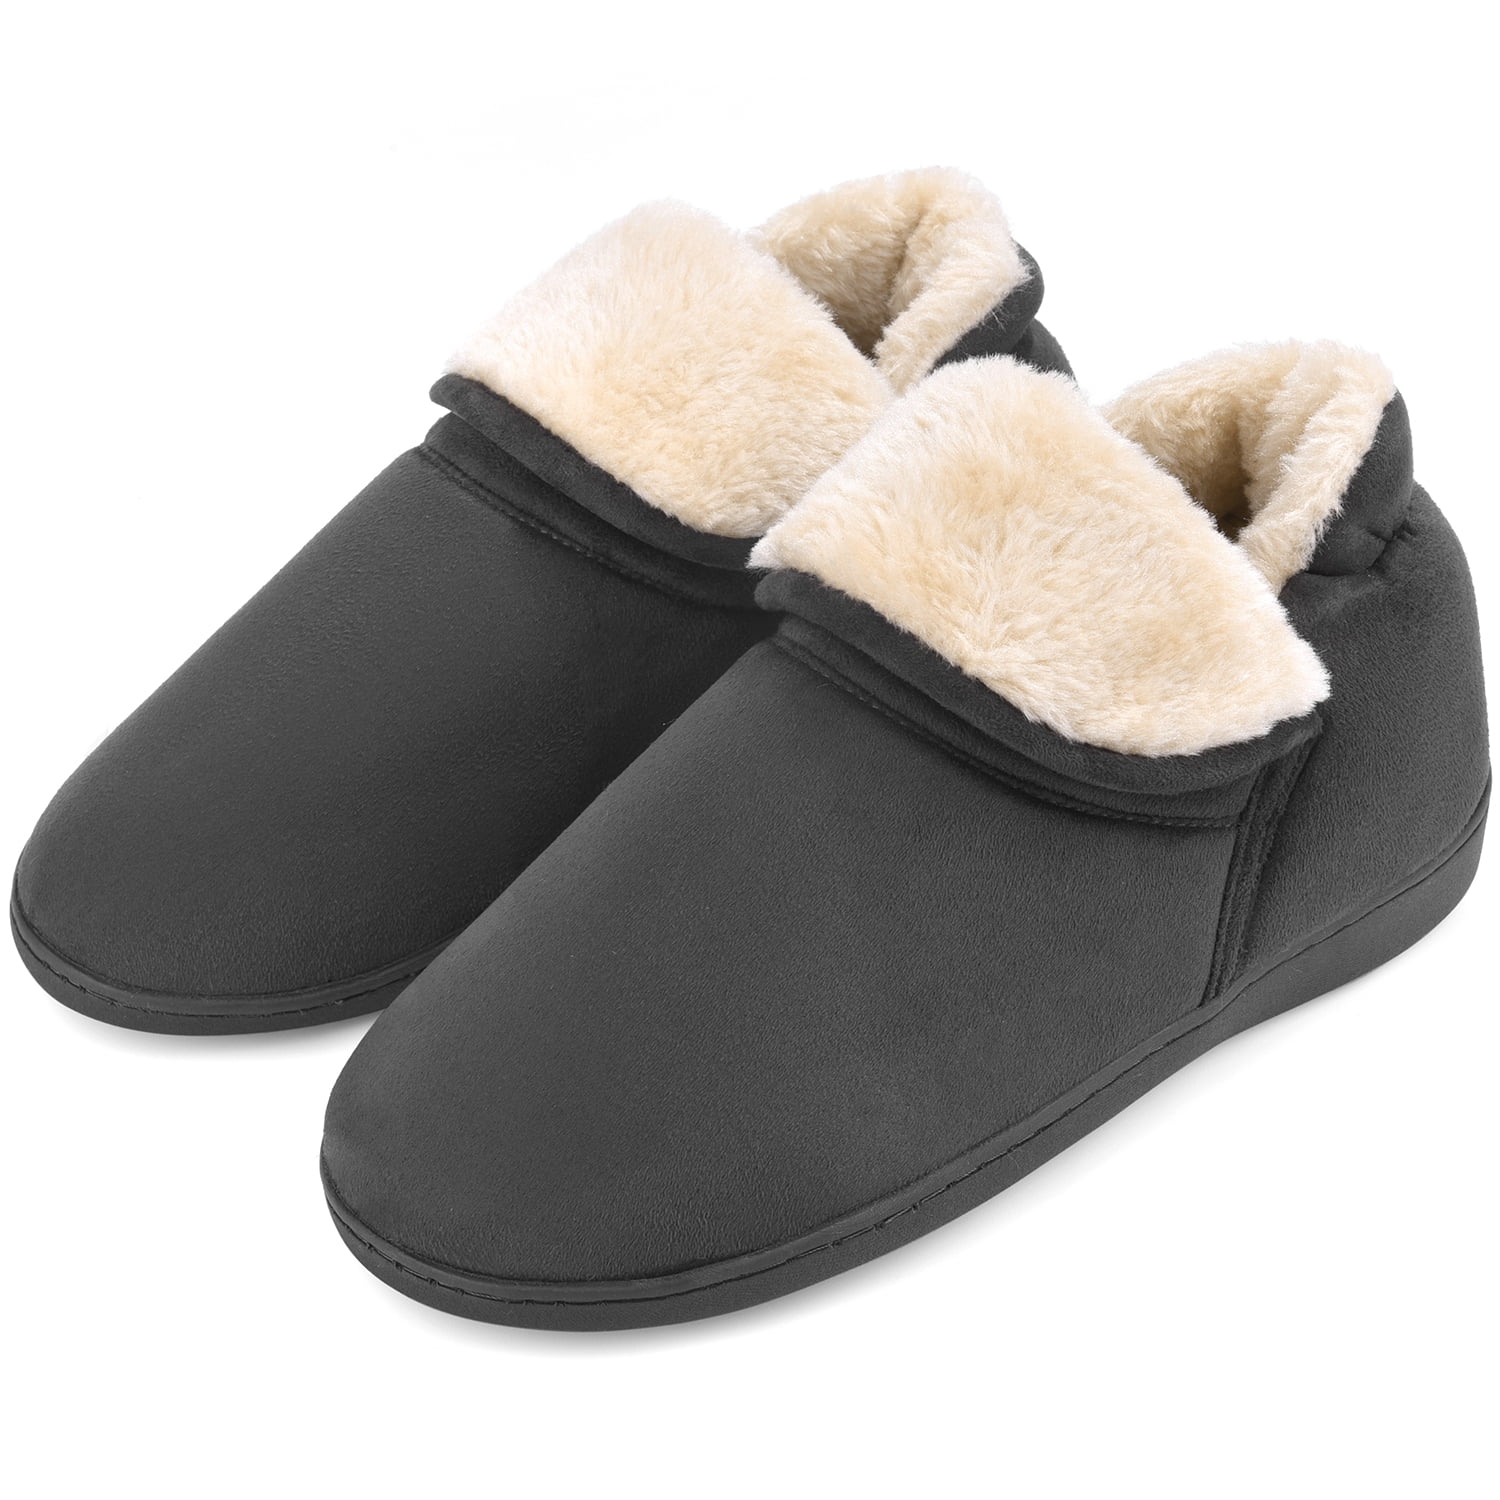 Women's Men's Winter House Warm Plush Slippers Suede Indoor Outdoor Casual Slip On Shoes Memory Foam Anti-Skid Rubber Sole Mules Clogs